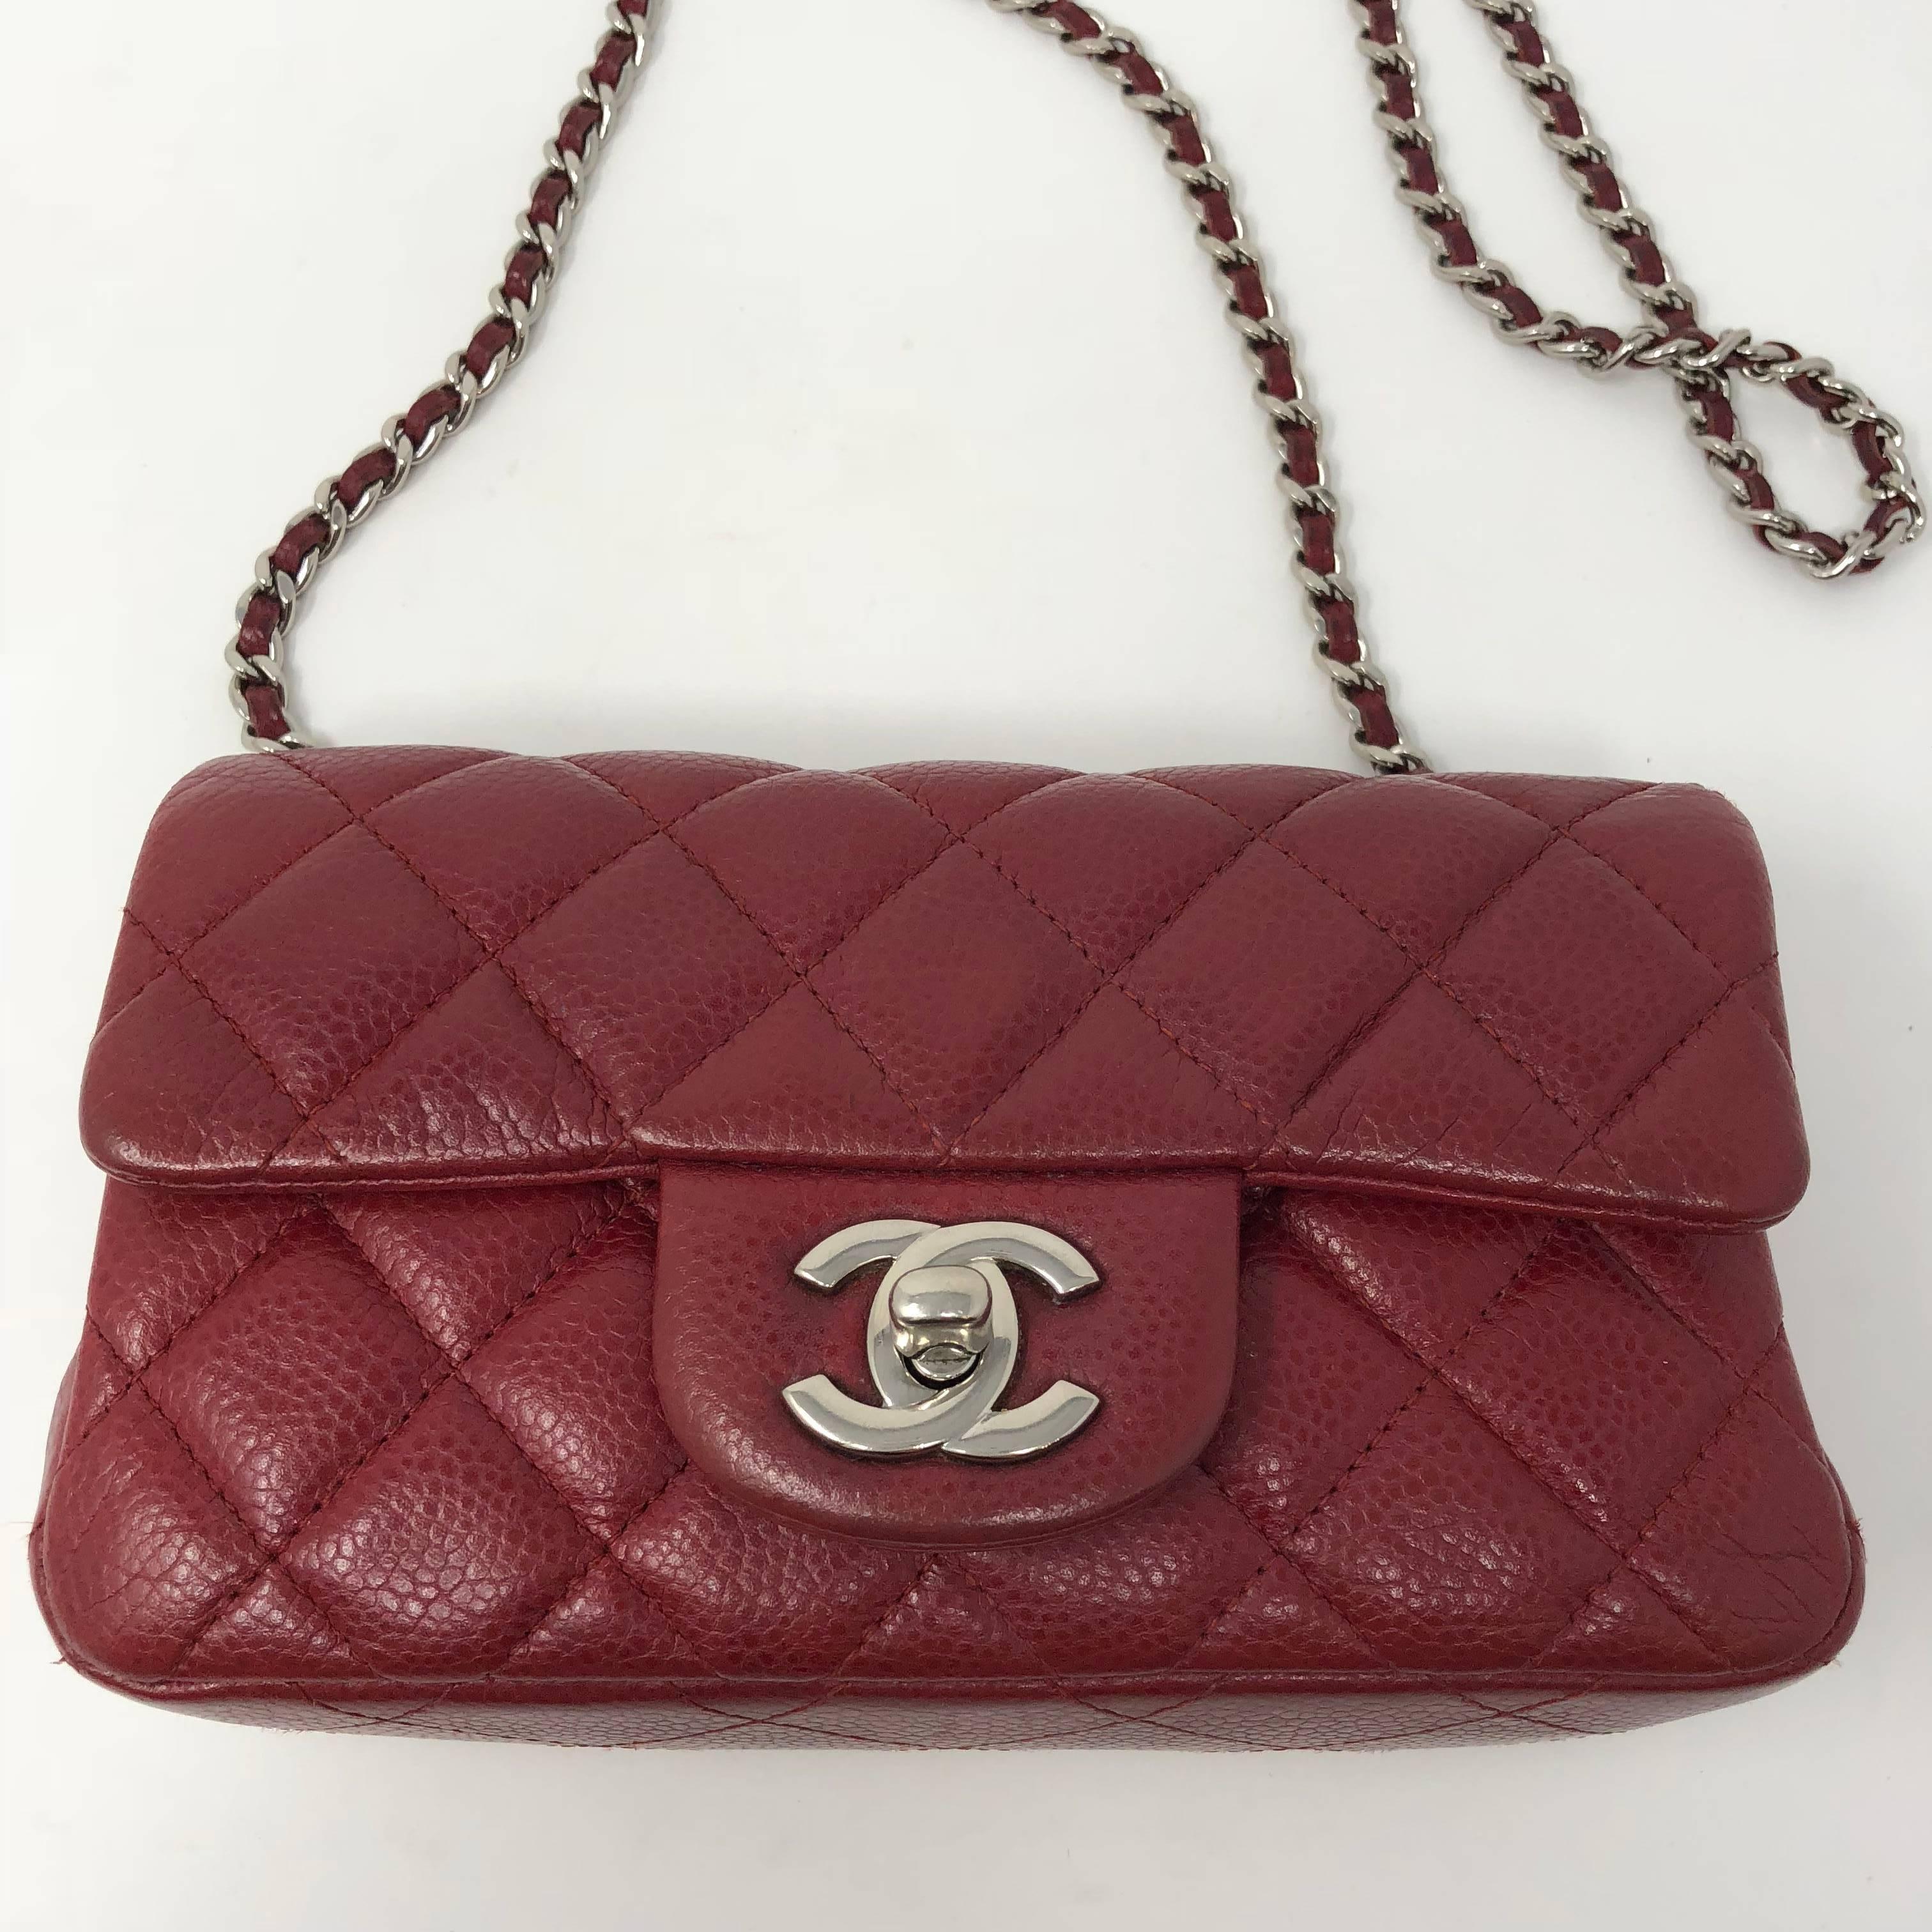 Extra mini size Chanel red crossbody bag in caviar leather. Silver hardware and in mint condition. From year 2012-2013. 